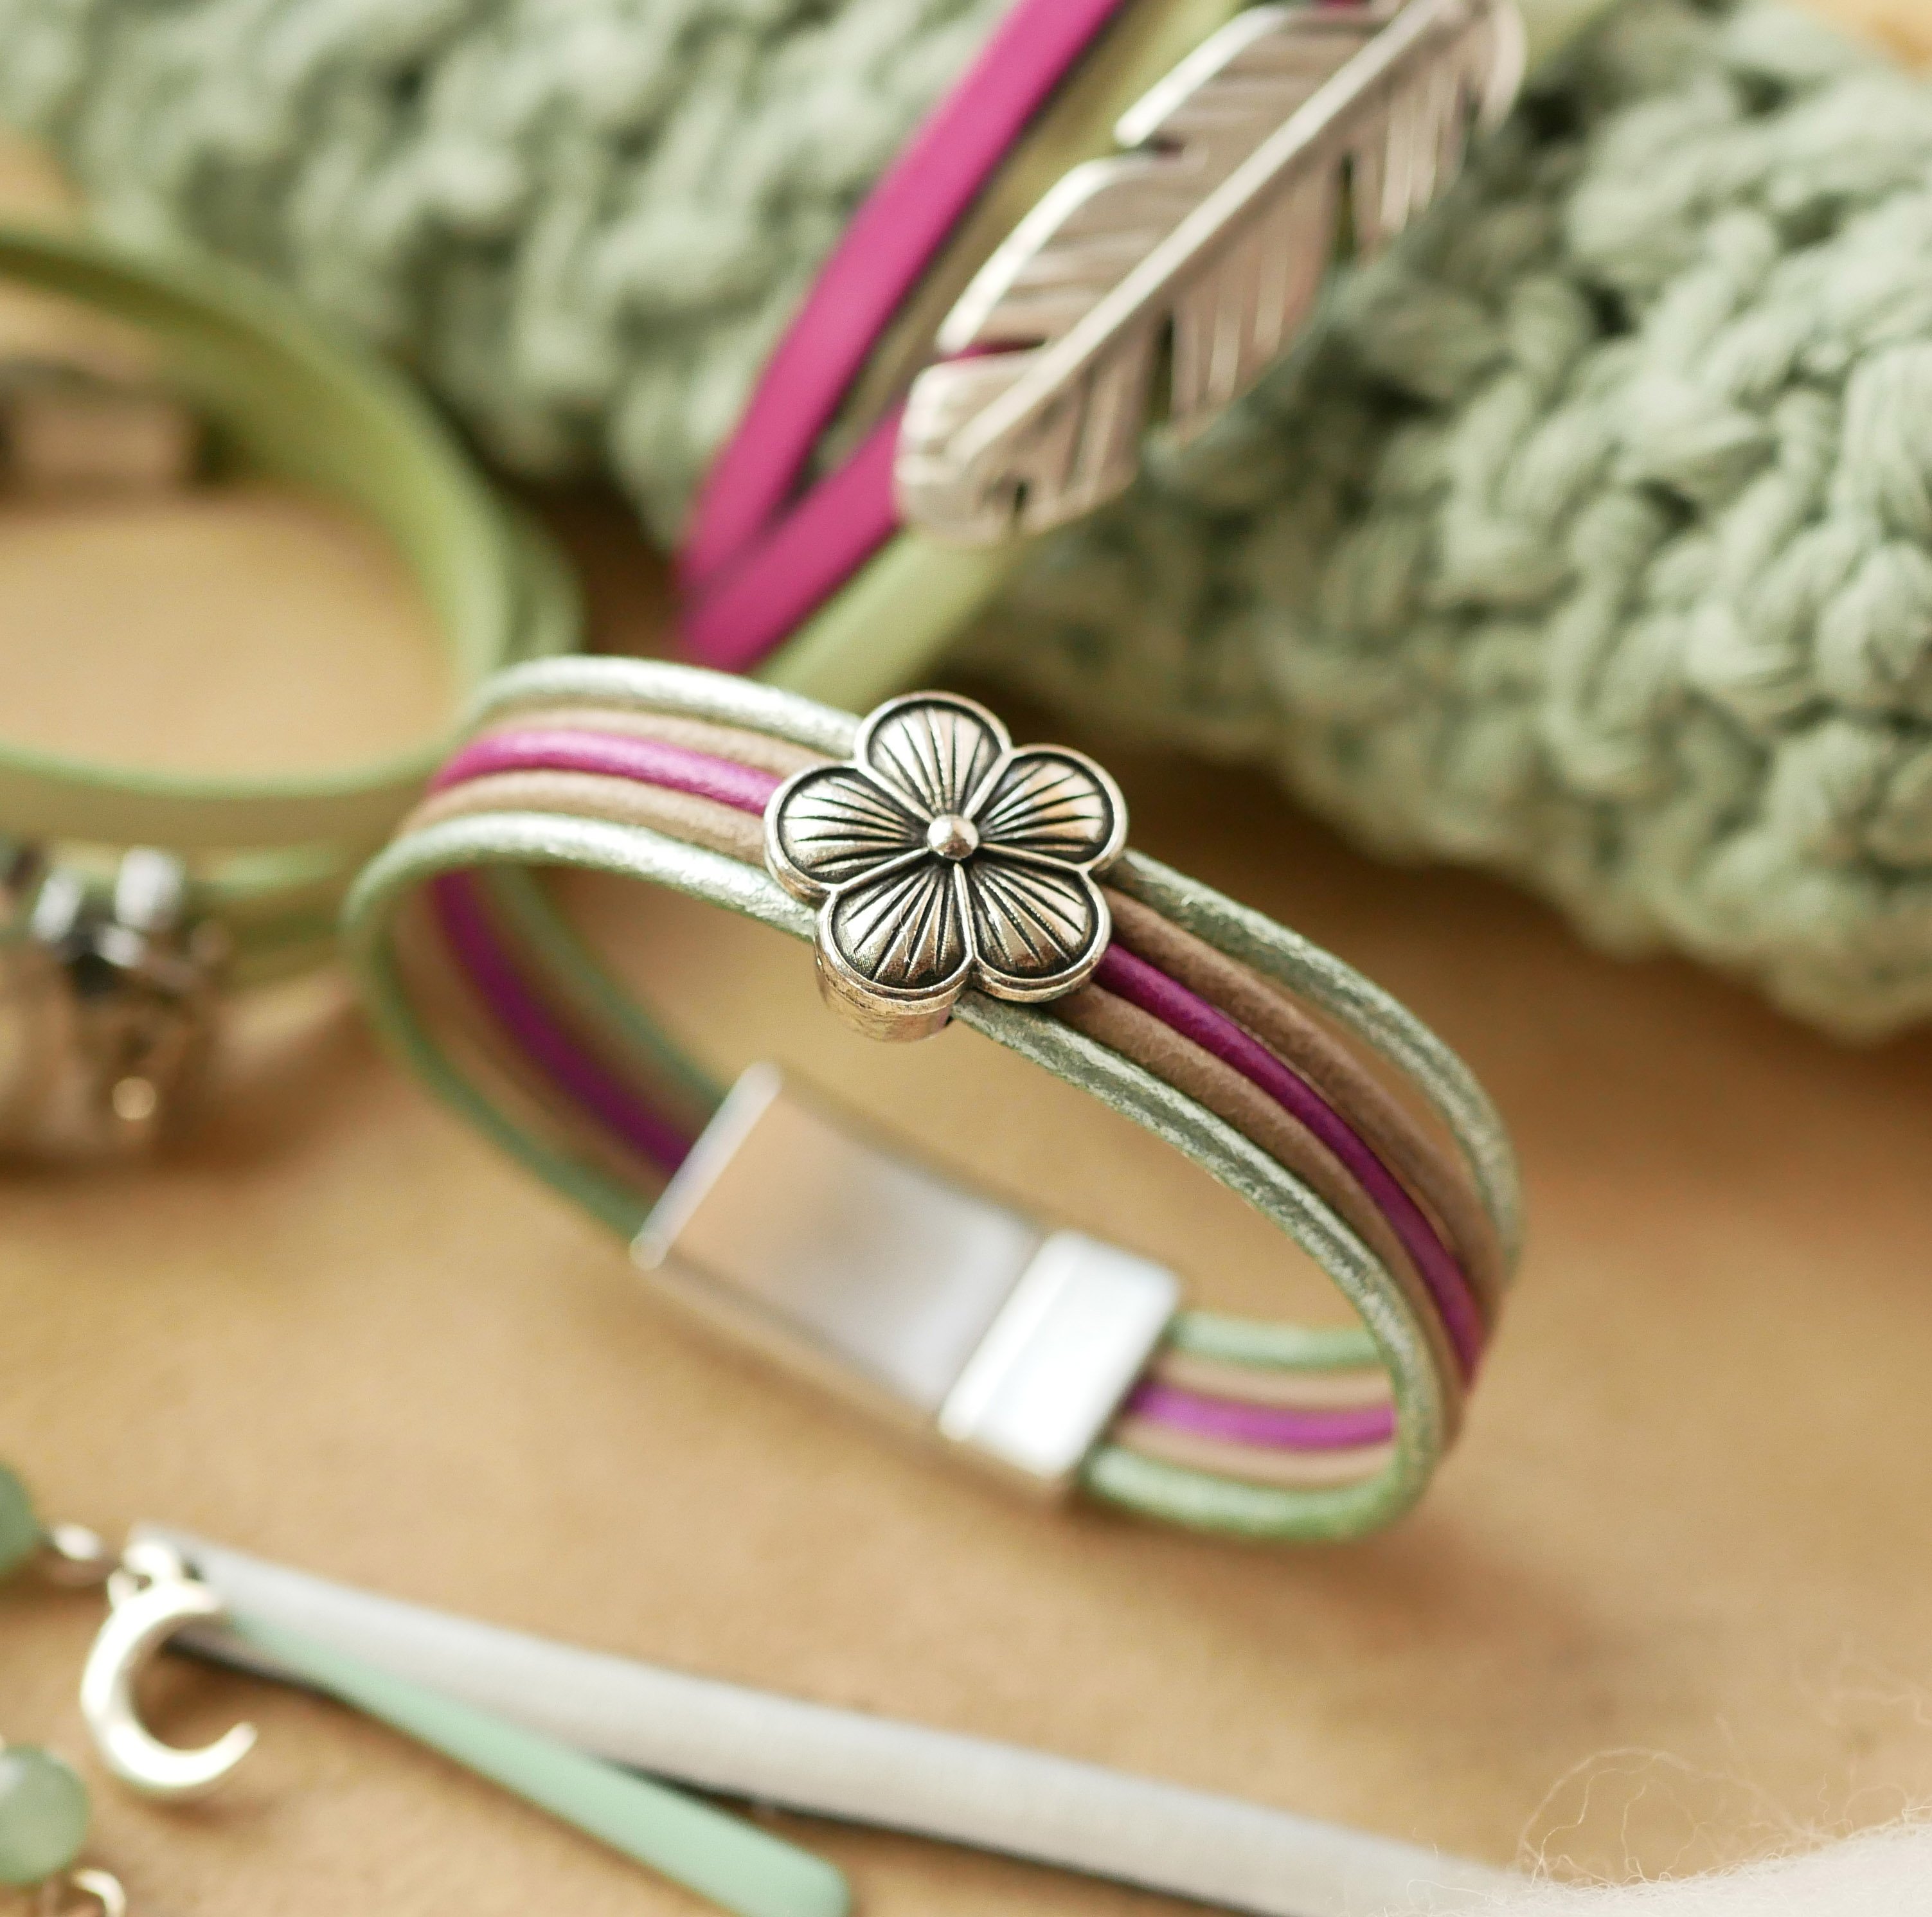 Women's bracelet with pastel leathers and silver flower design